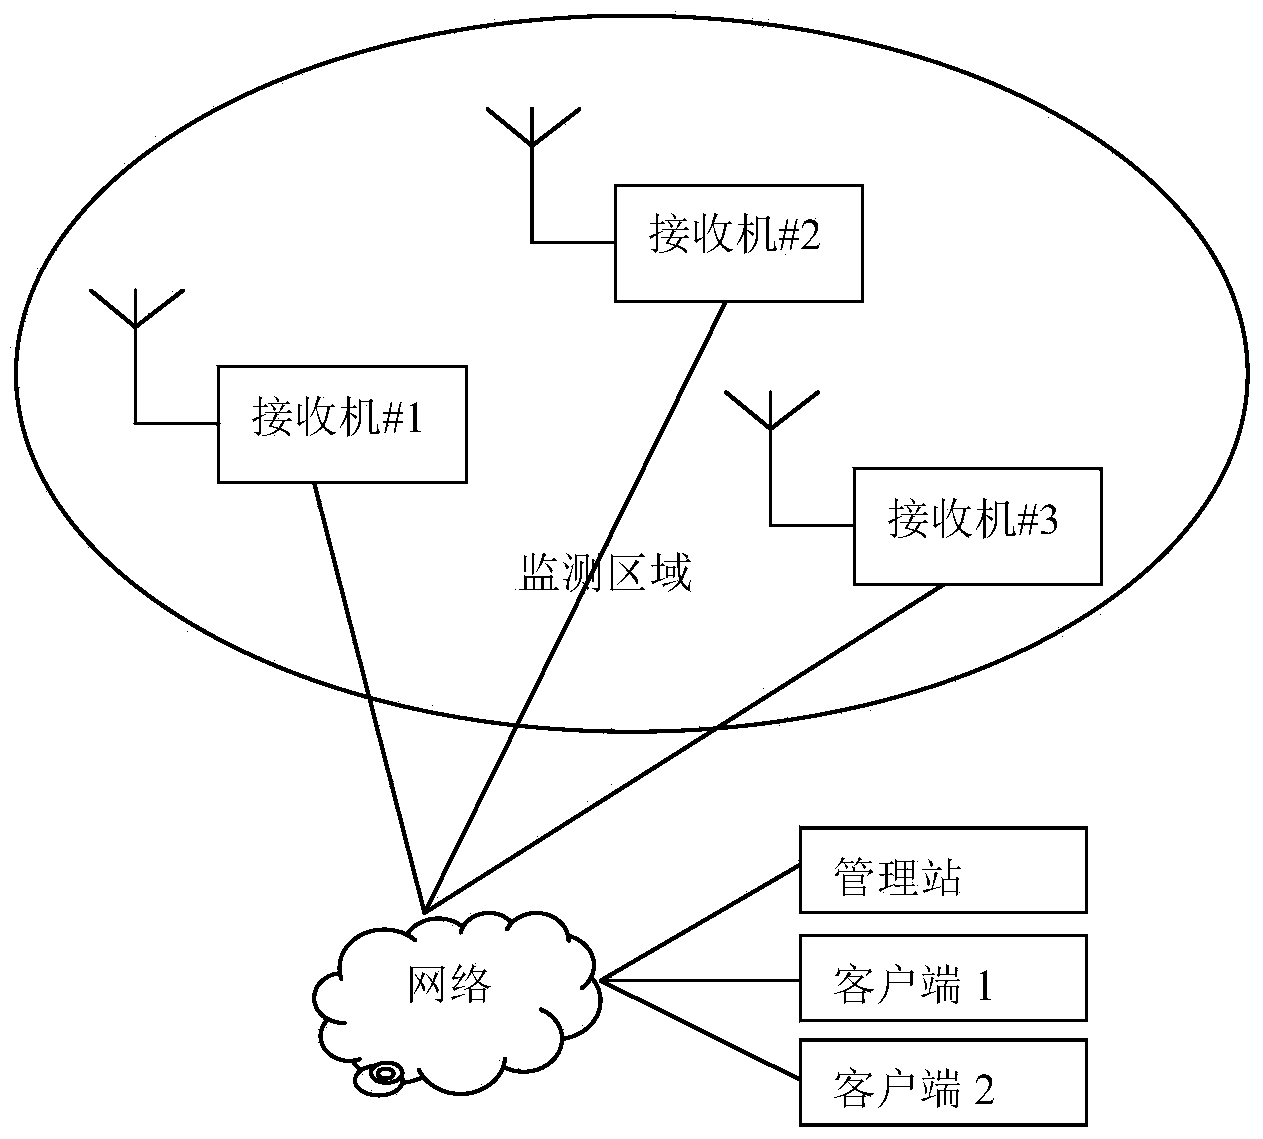 Distributed radio monitoring network and method